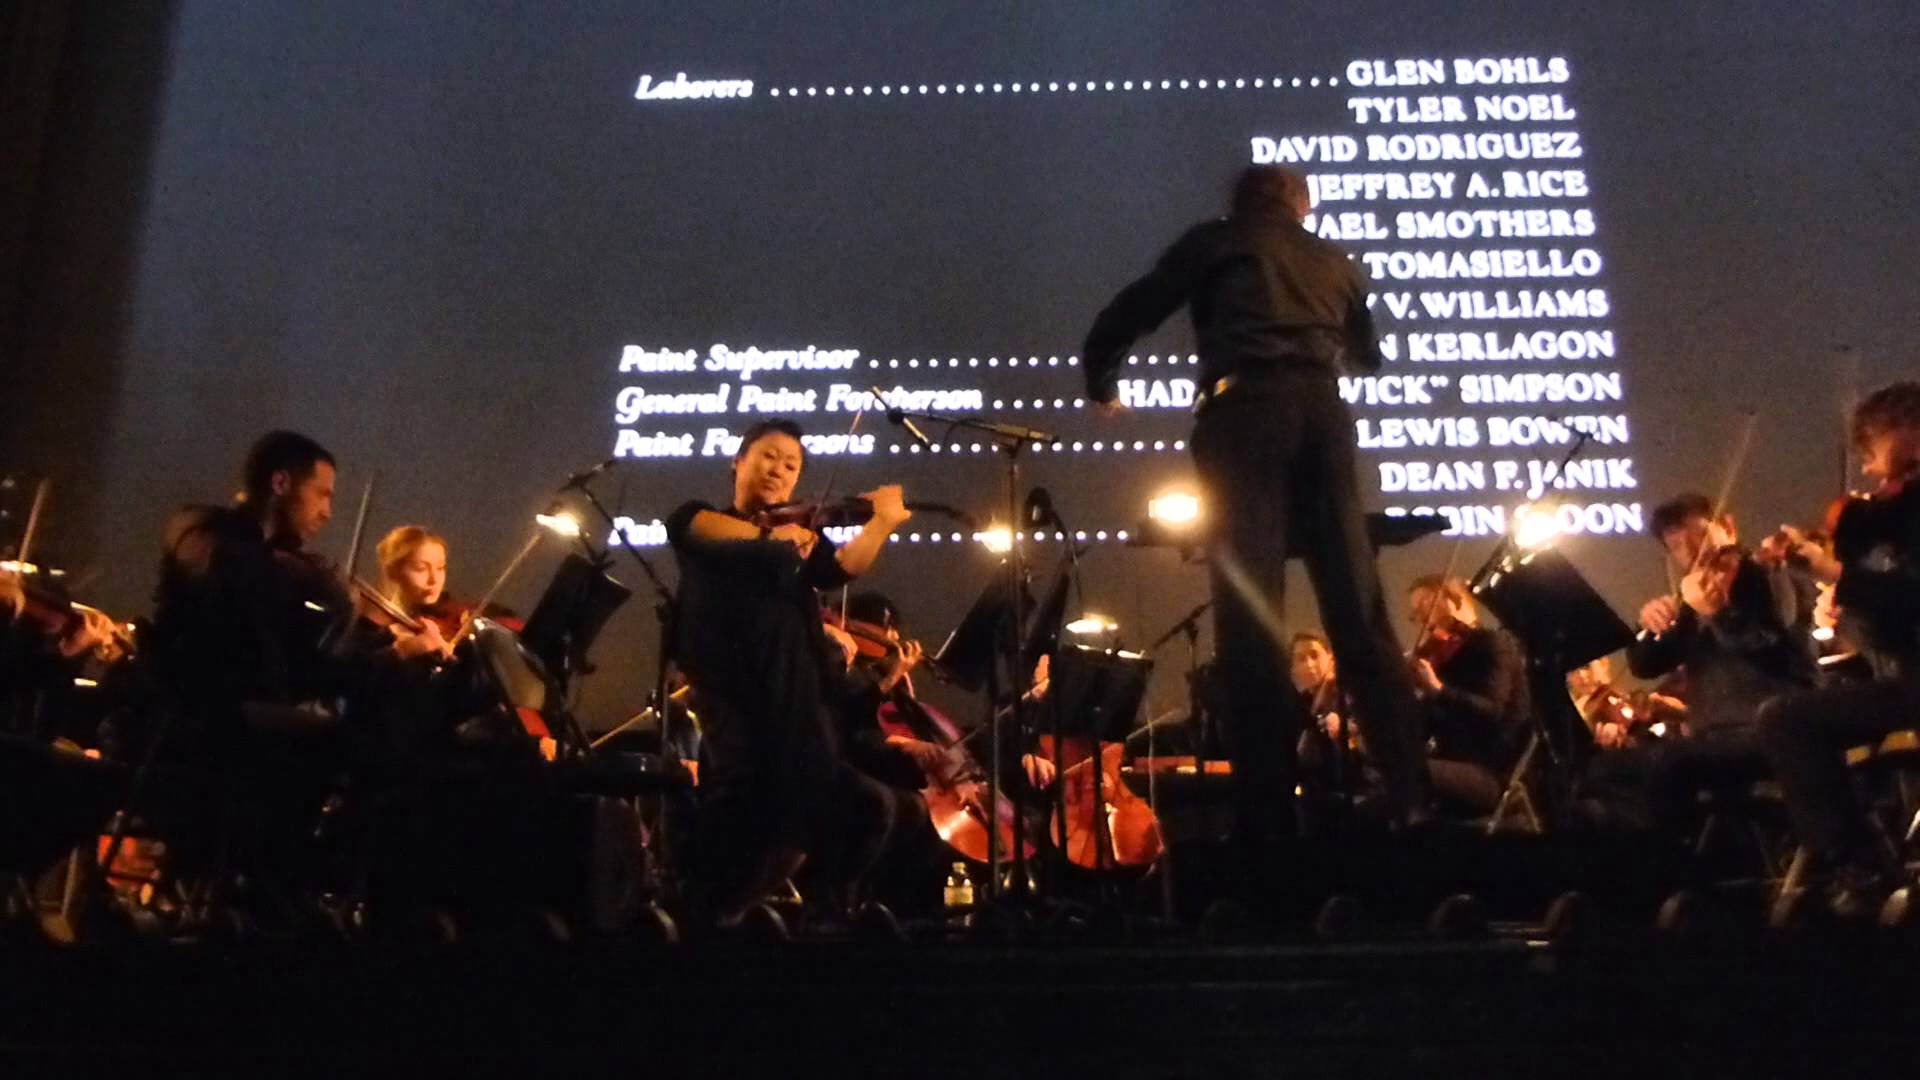 Film & Music: Blancanieves (2012), music performance by Wordless Music Orchestra with Alfonso Vilallonga